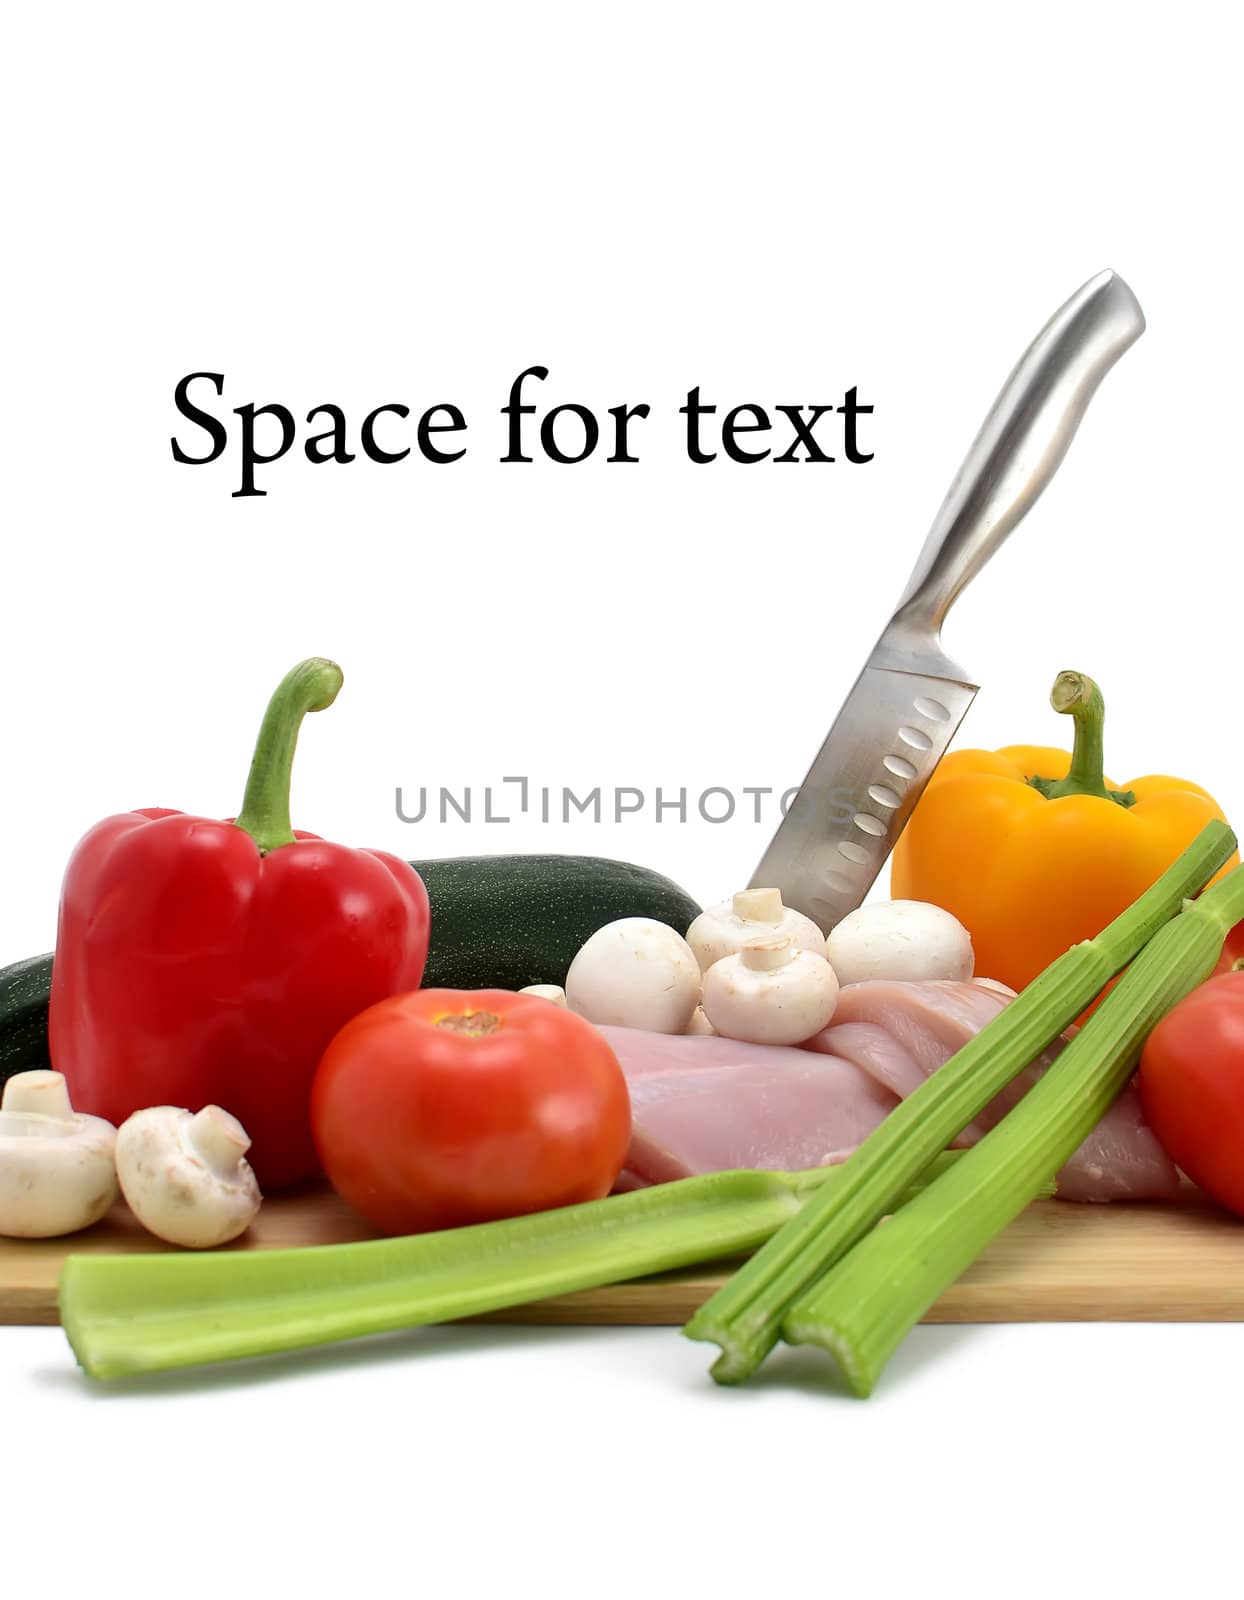 chicken, knife and vegetables on a cutting board, isolated on white, space for text